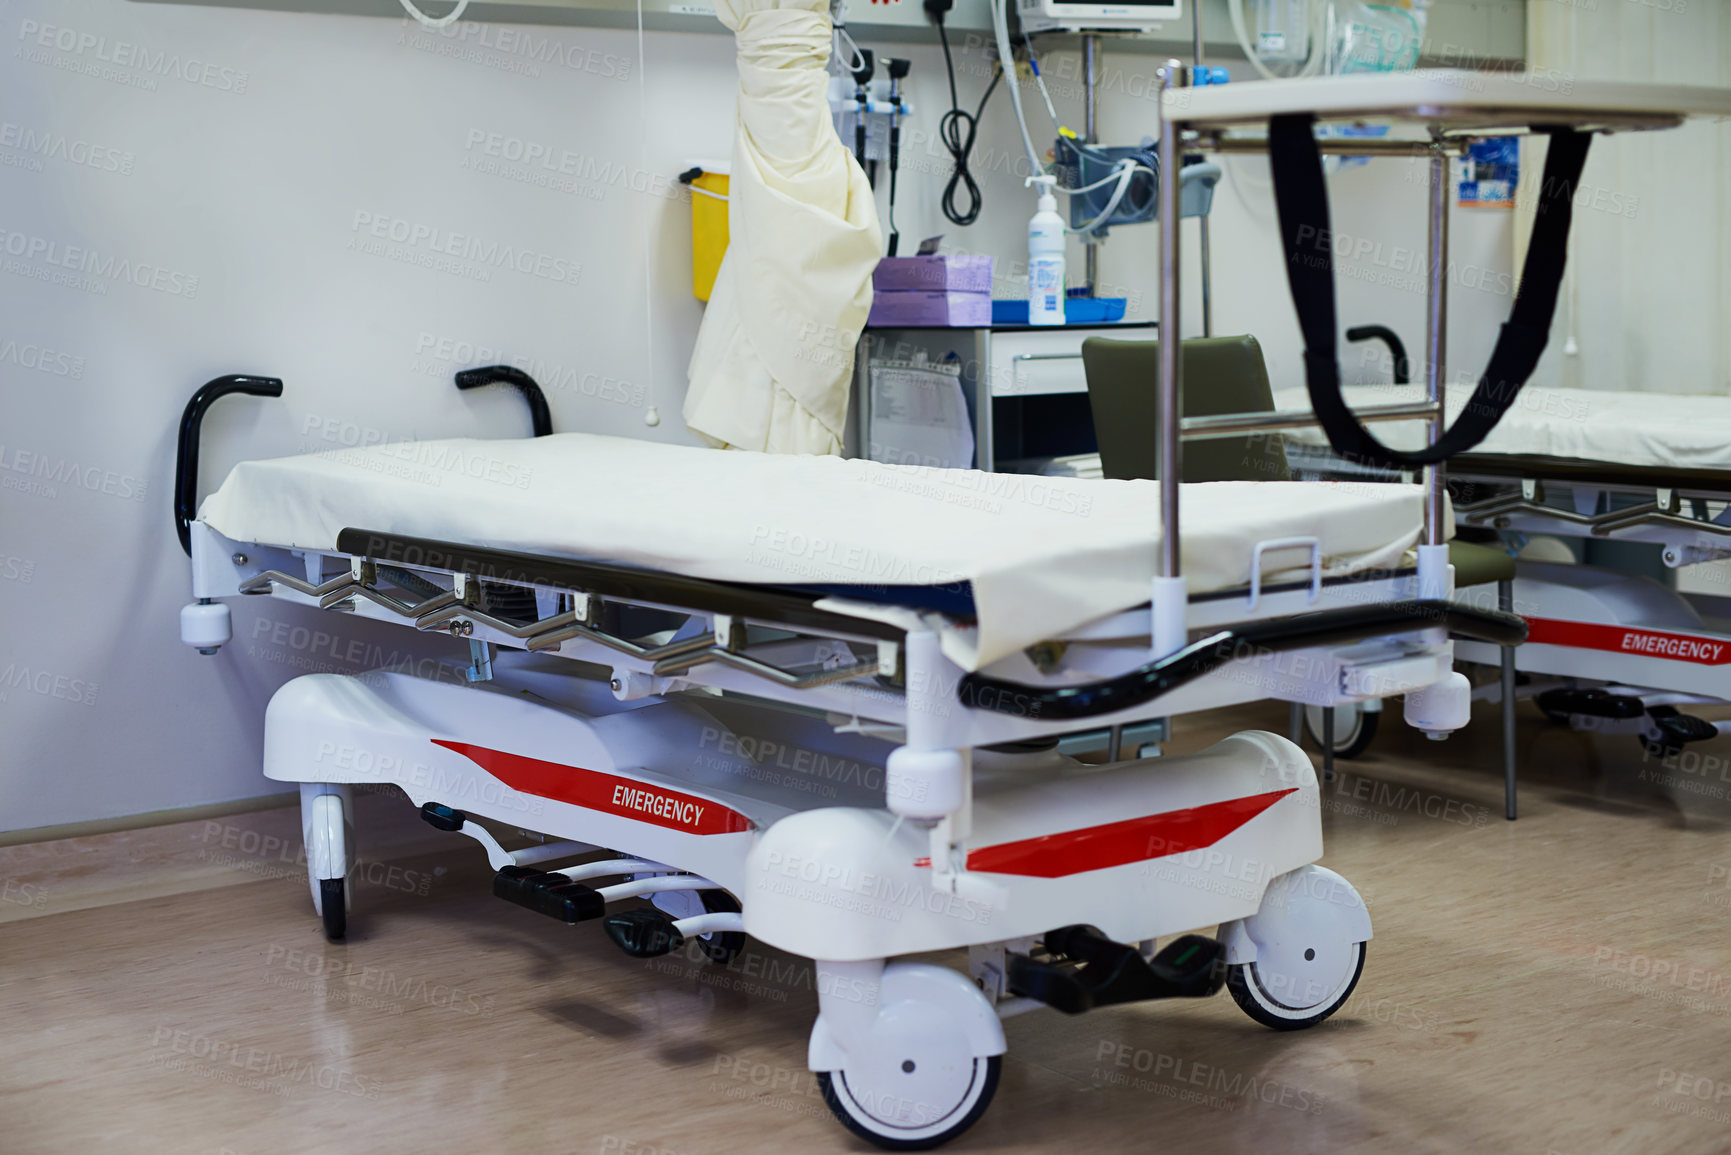 Buy stock photo Shot of a bed in a hospital ward